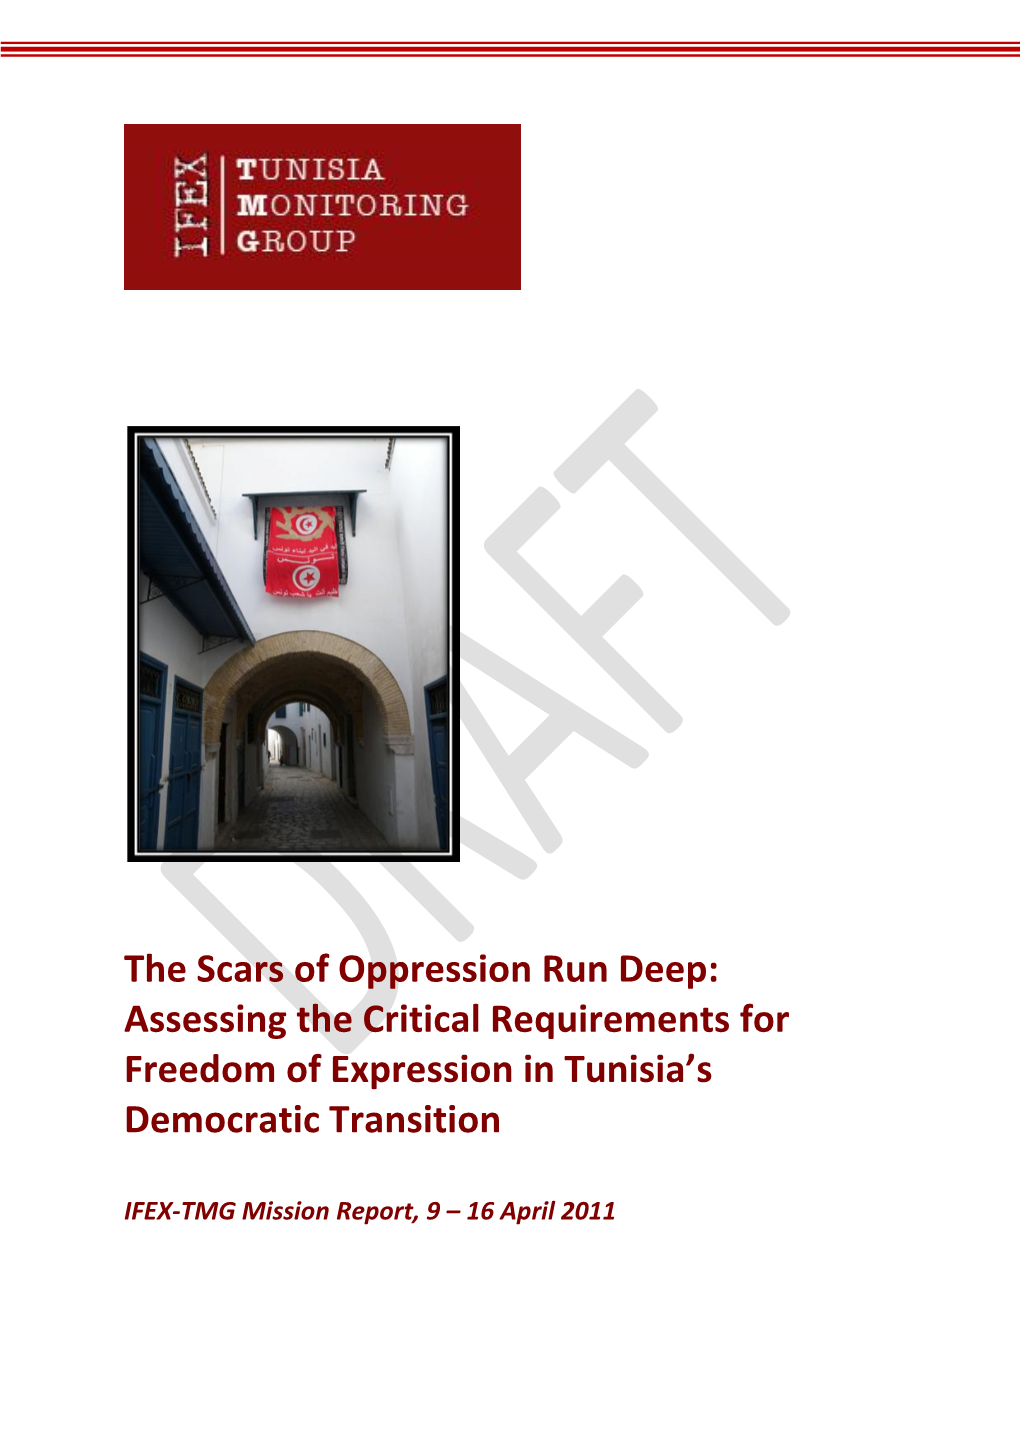 The Scars of Oppression Run Deep: Assessing the Critical Requirements for Freedom of Expression in Tunisia’S Democratic Transition